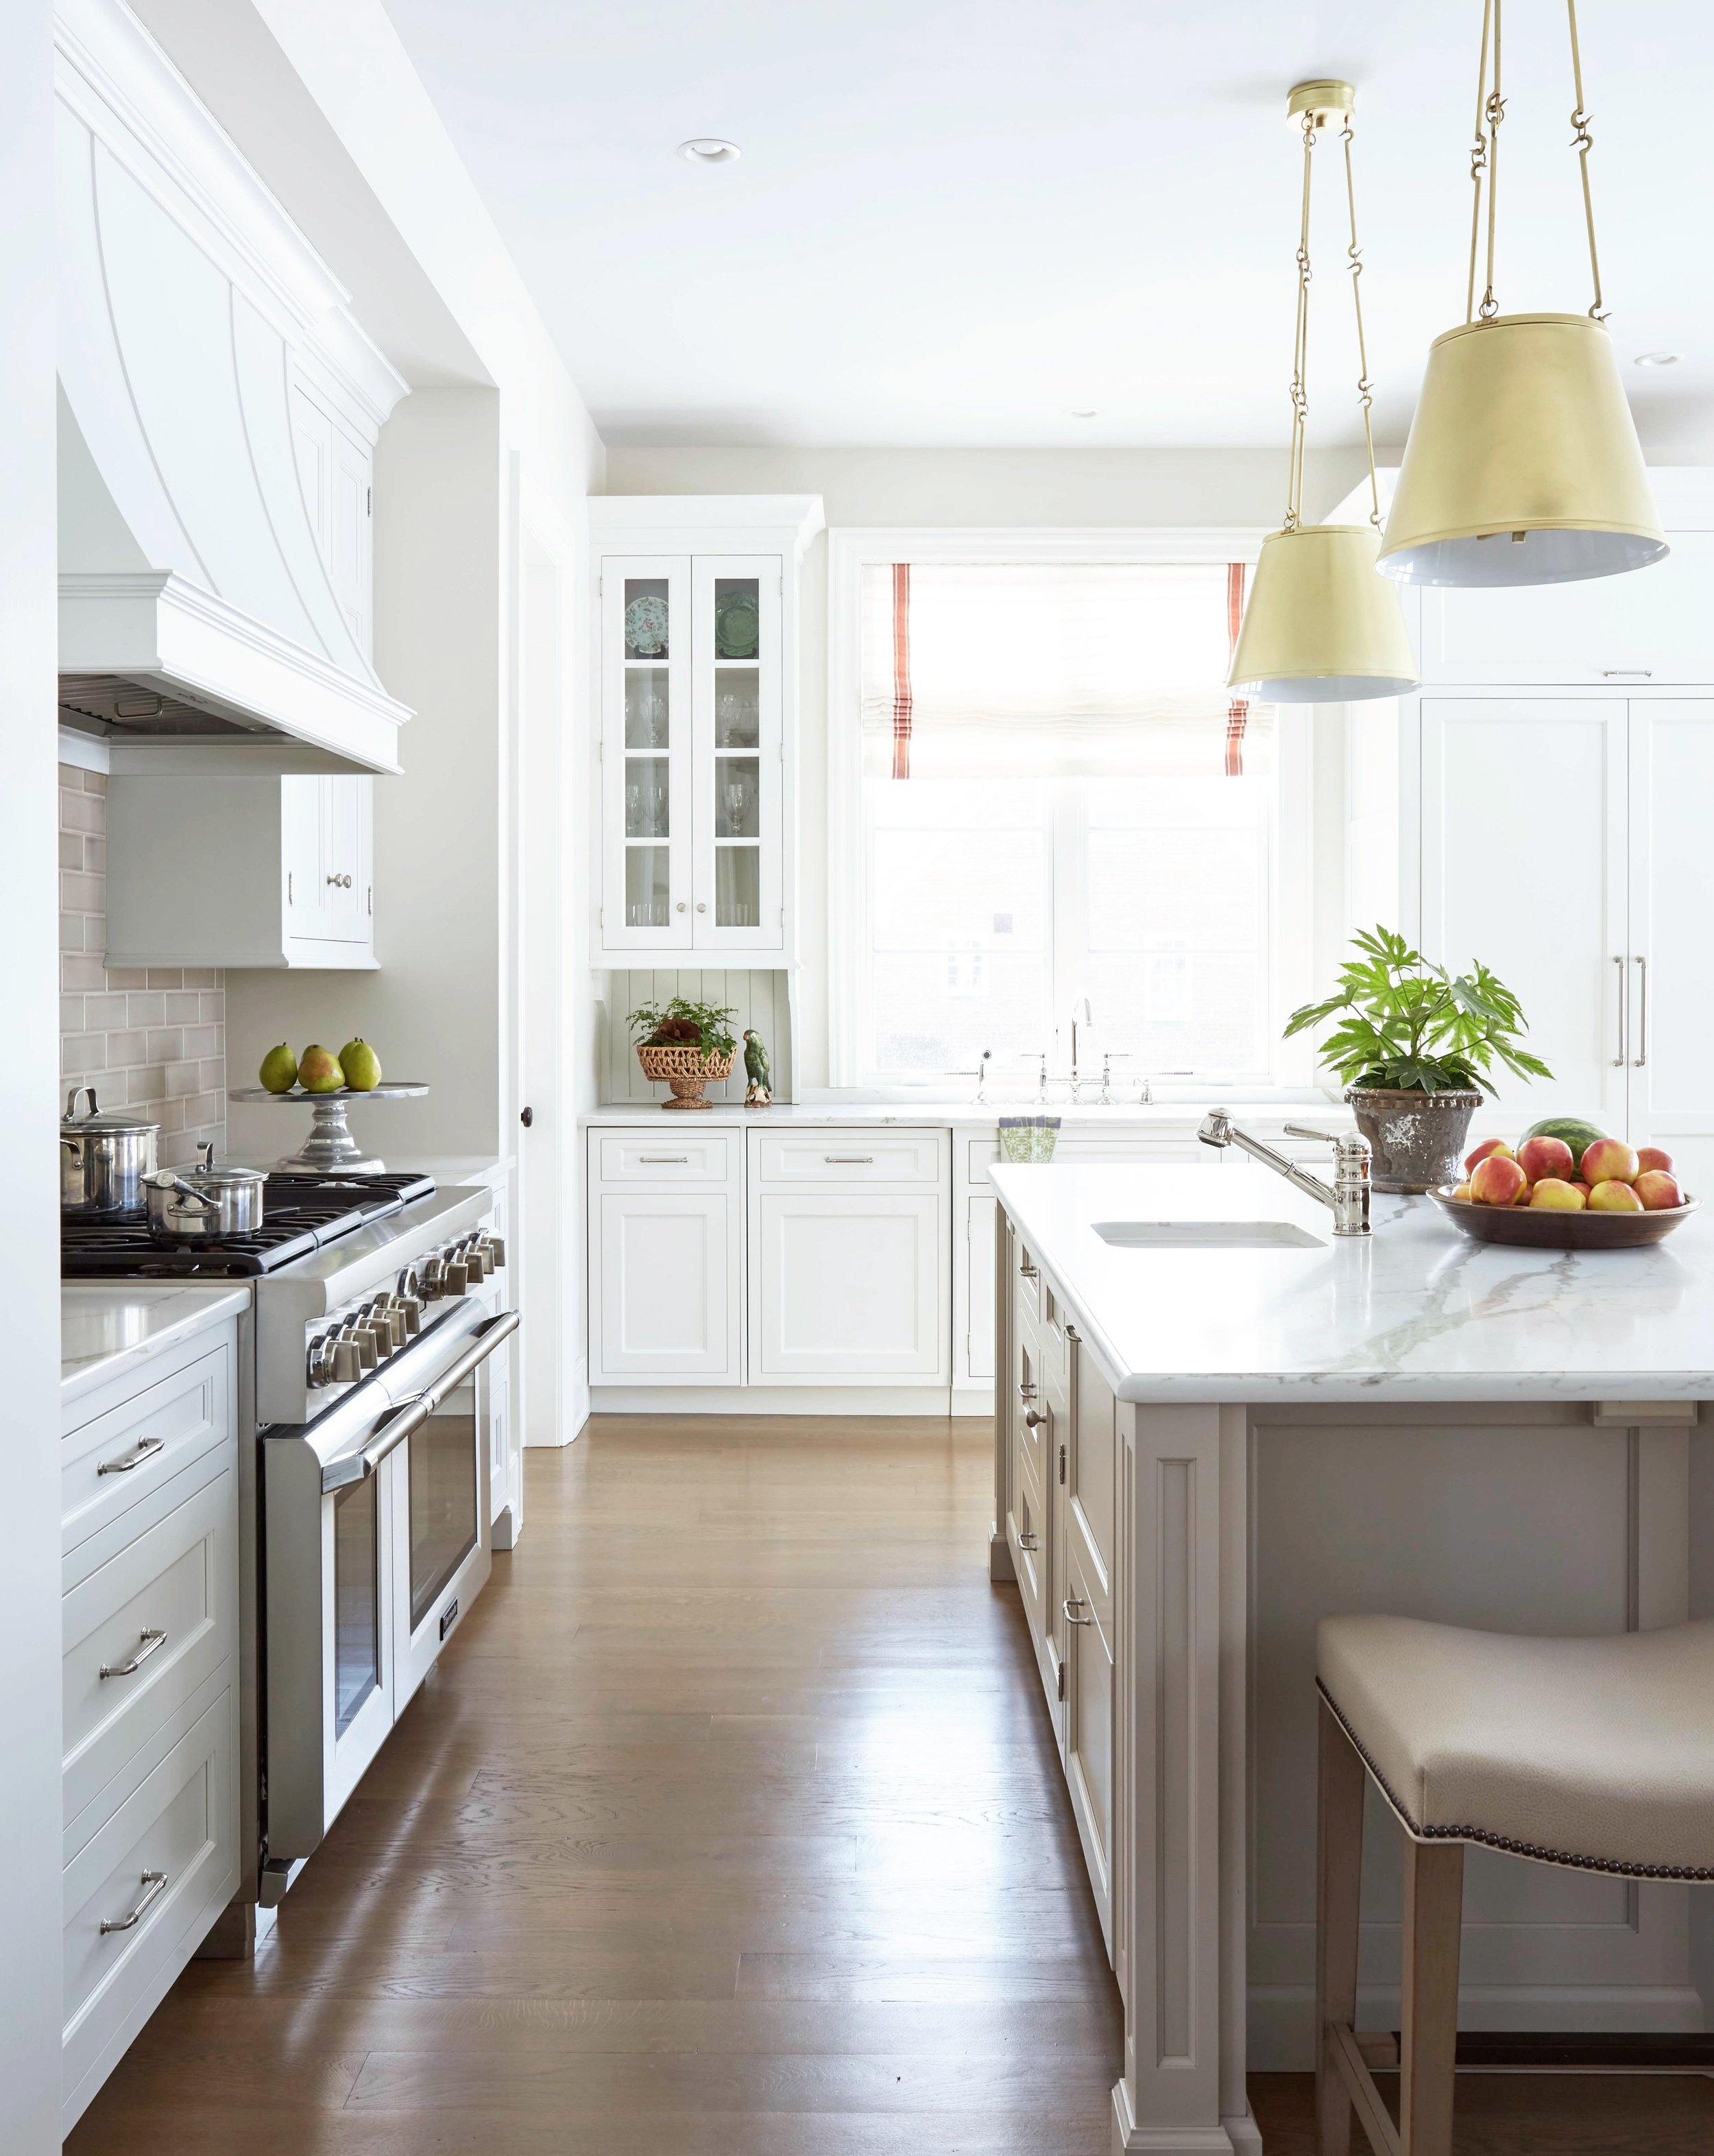 PROJECTS | Recent Work - PB Kitchen Design & Cabinetry